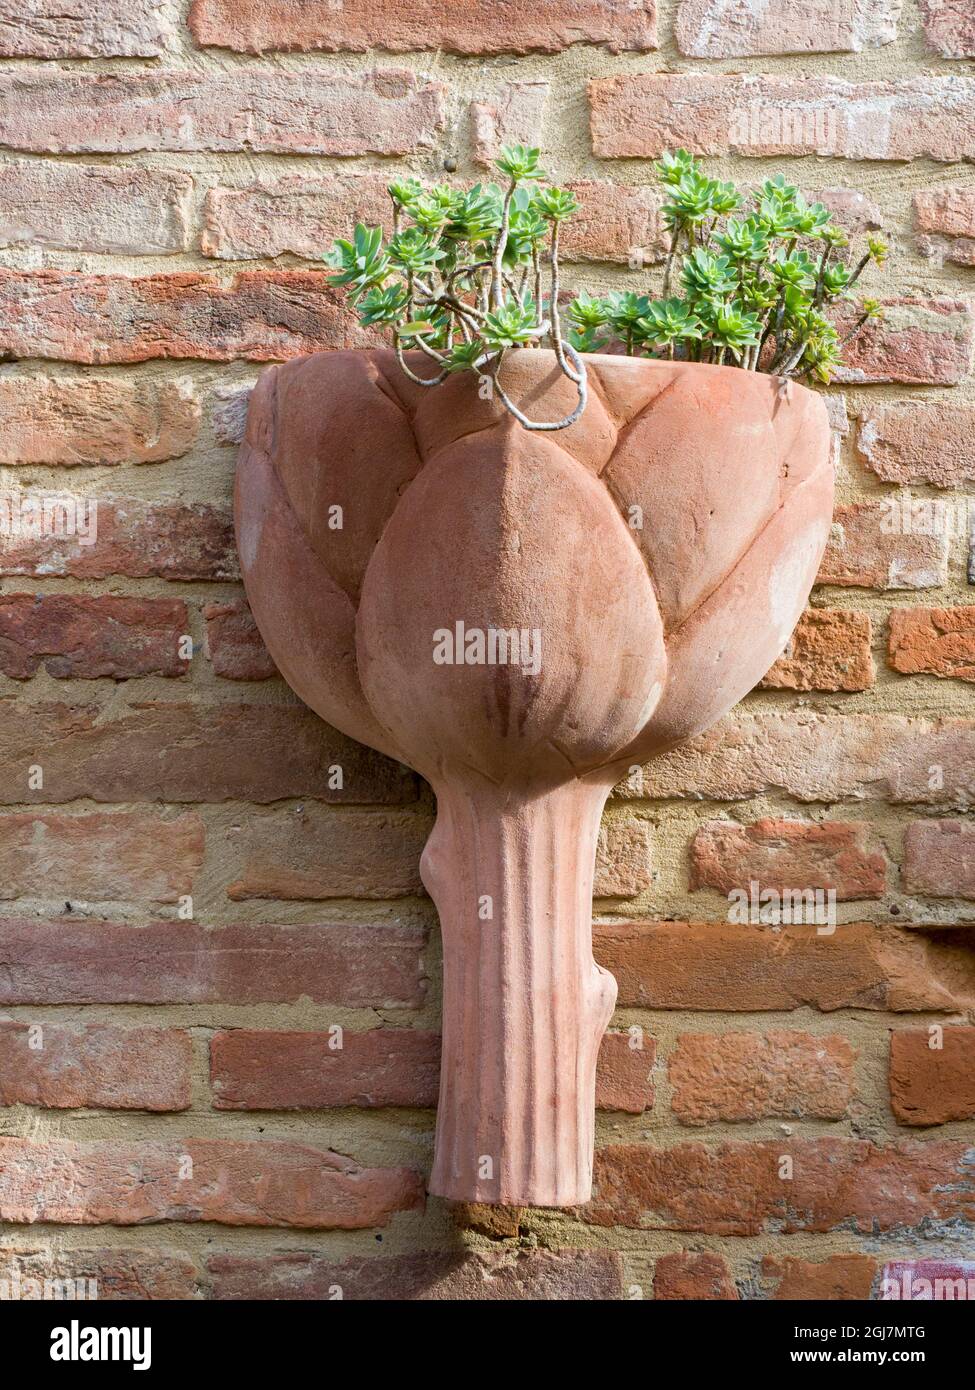 Italy, Tuscany. An artichoke wall planter in the village of Chiusure in the province of Siena. Stock Photo